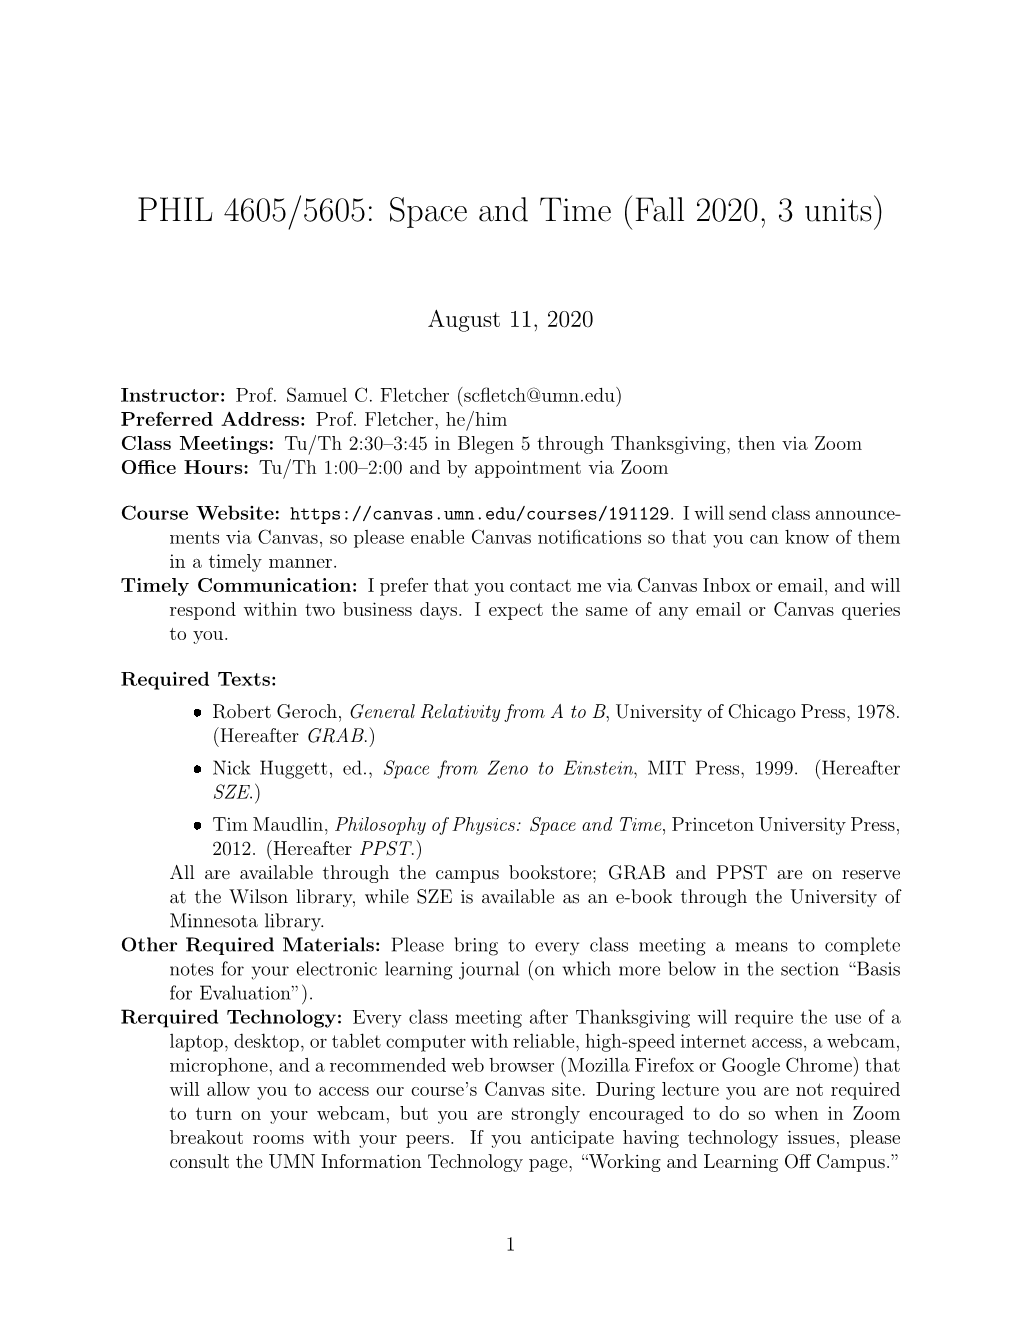 PHIL 4605/5605: Space and Time (Fall 2020, 3 Units)